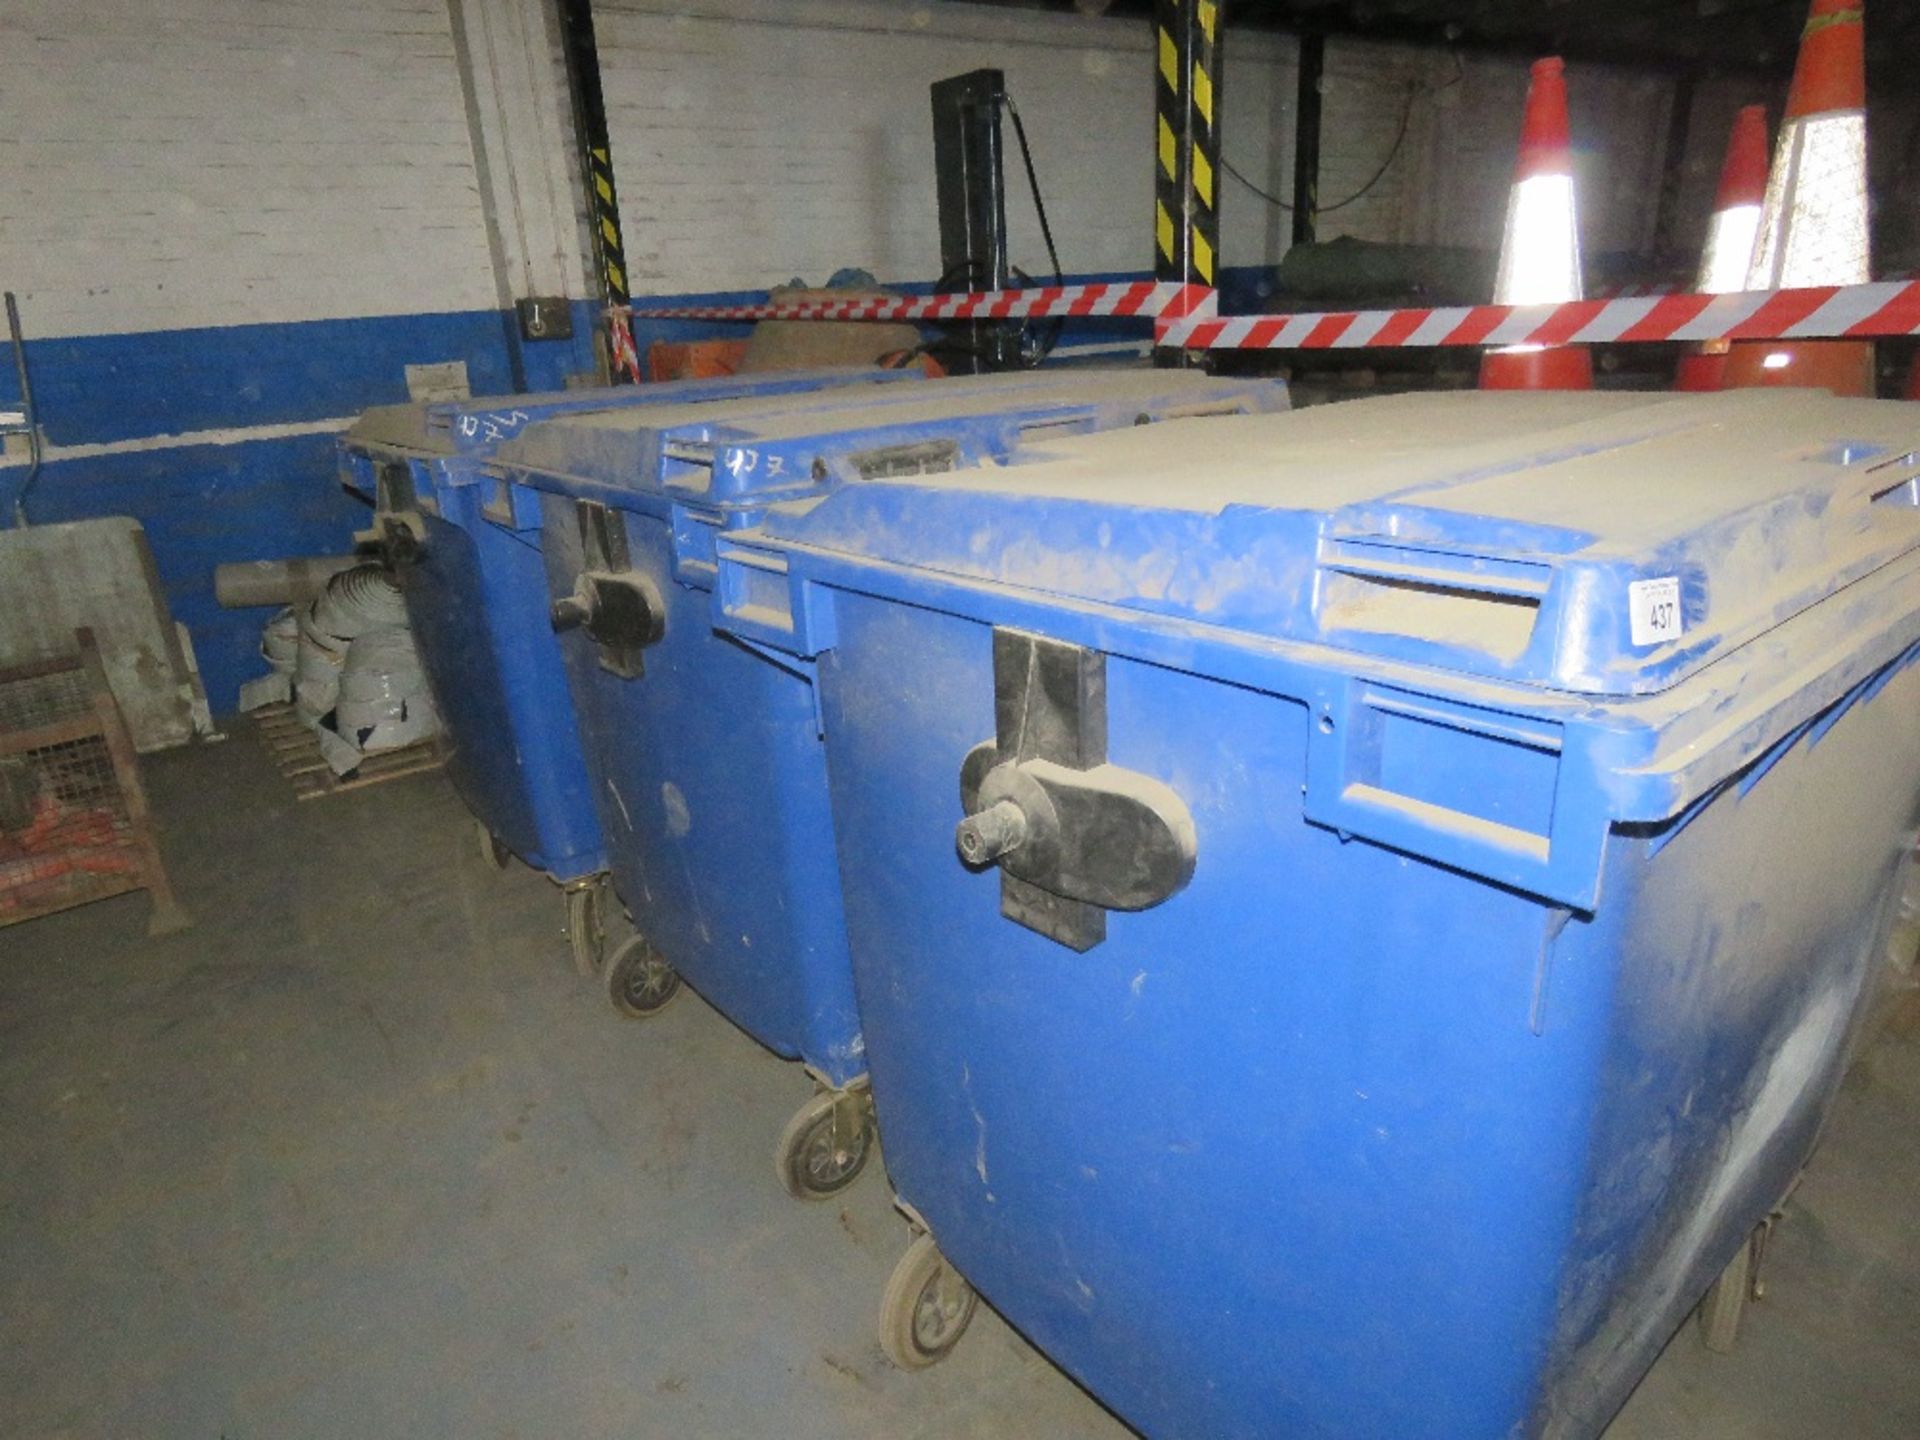 3 X LARGE BLUE WASTE BINS CONTAINING SAND PAPER. LOT LOCATION: SS13 1EF, BASILDON, ESSEX. - Image 6 of 6